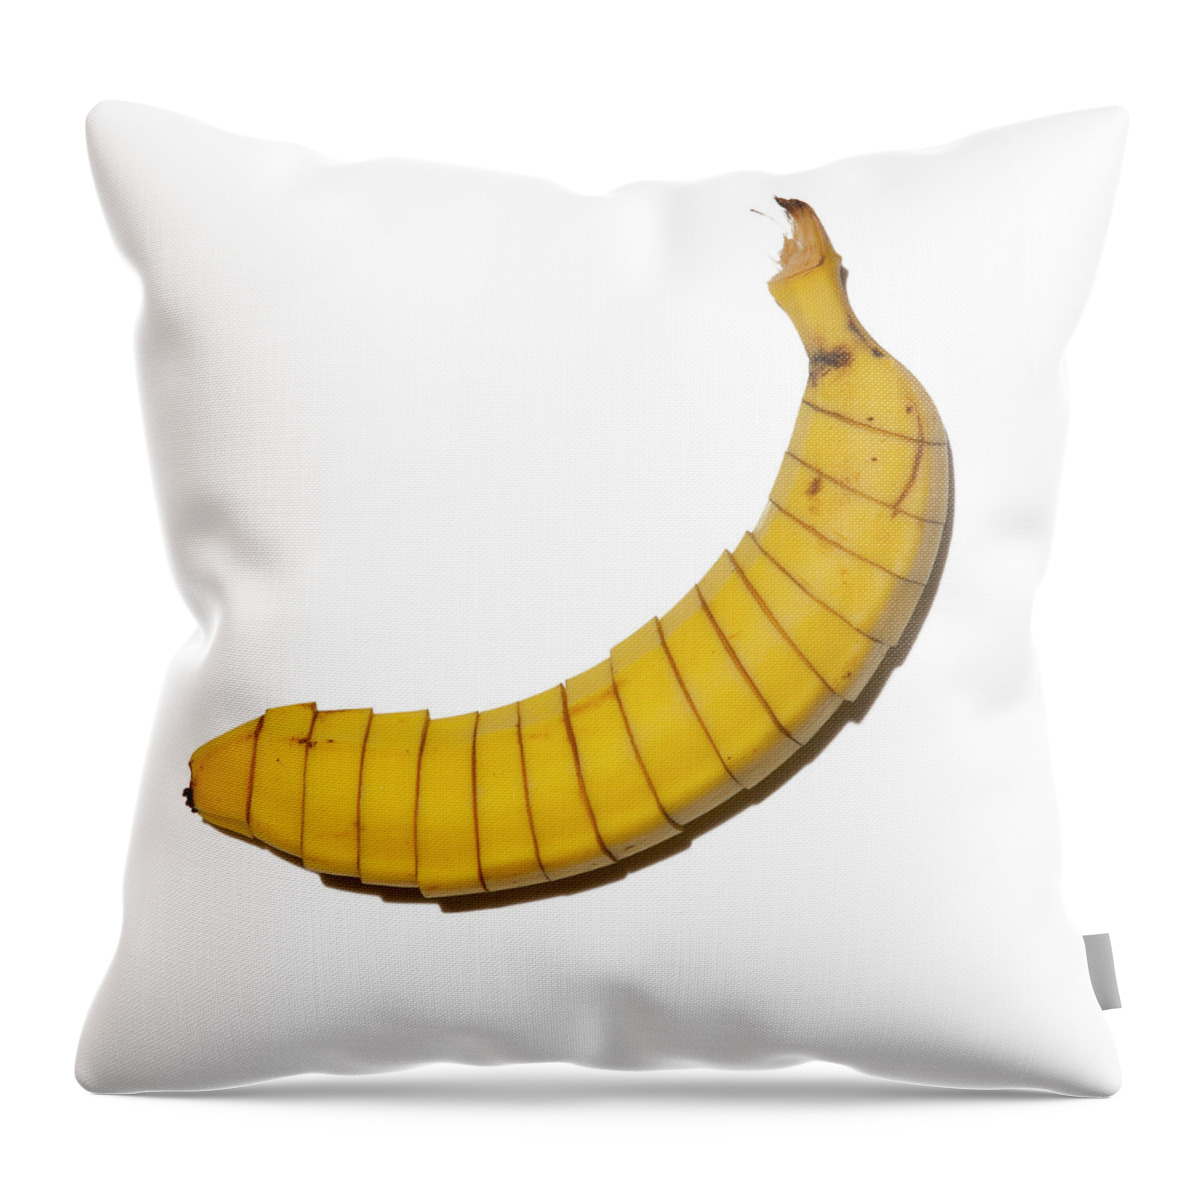 White Background Throw Pillow featuring the photograph Sliced Banana On White Background by Maciej Toporowicz, Nyc